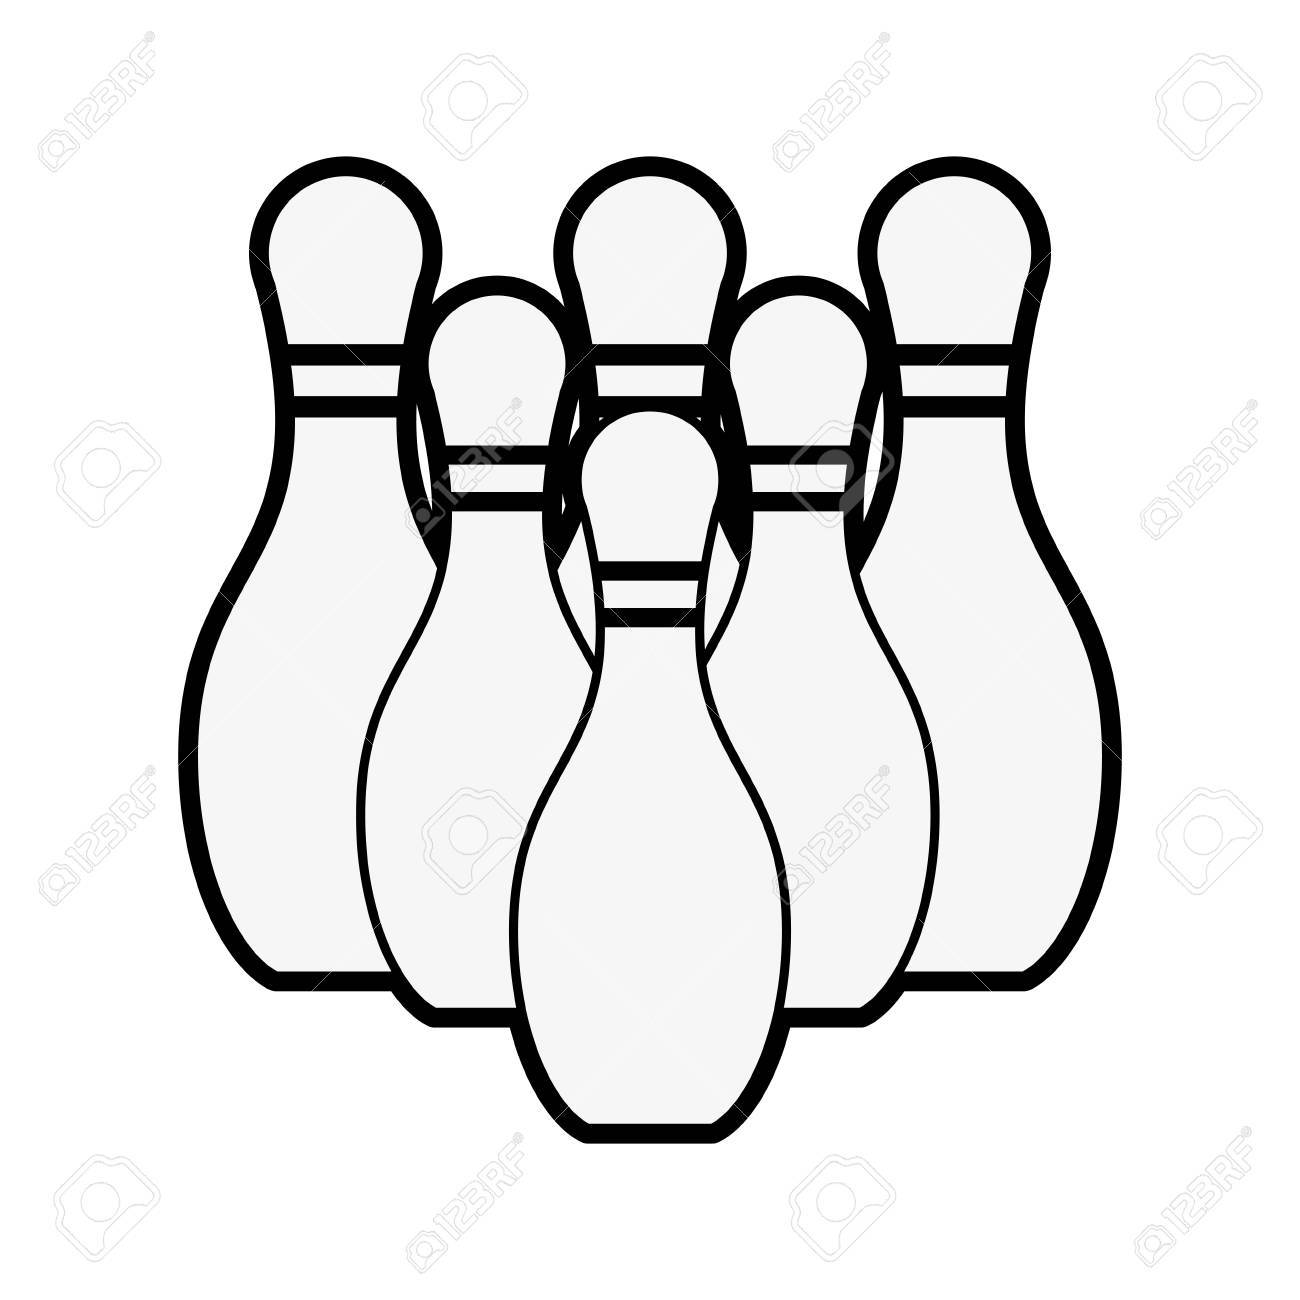 bowling pins icon image vector illustration design black and...